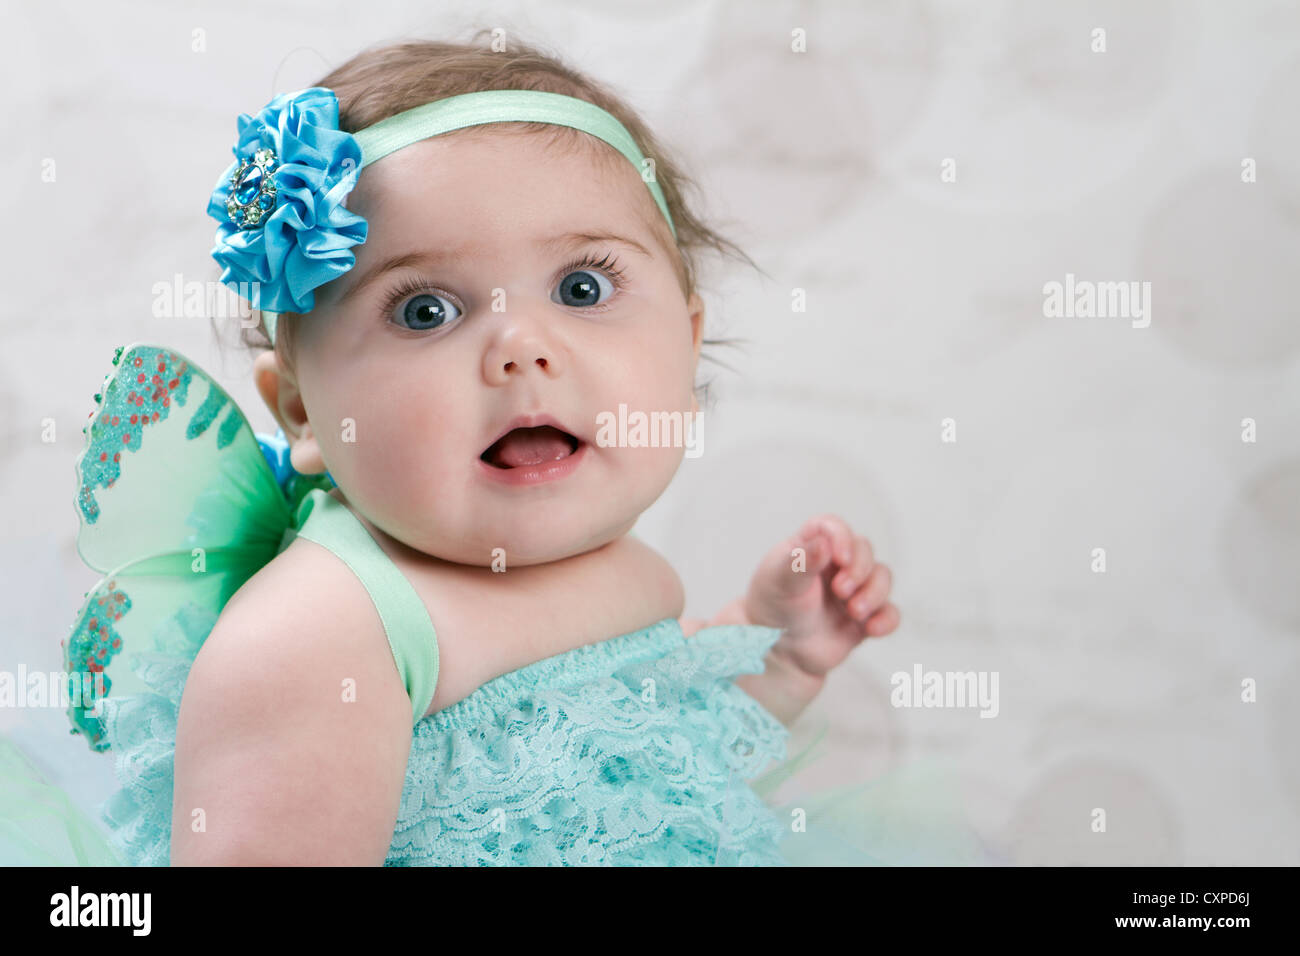 Baby girl 6 month old dressed as a pixie with fairy wings and turquoise ruffled bloomers. She wears a one flower headband. Stock Photo